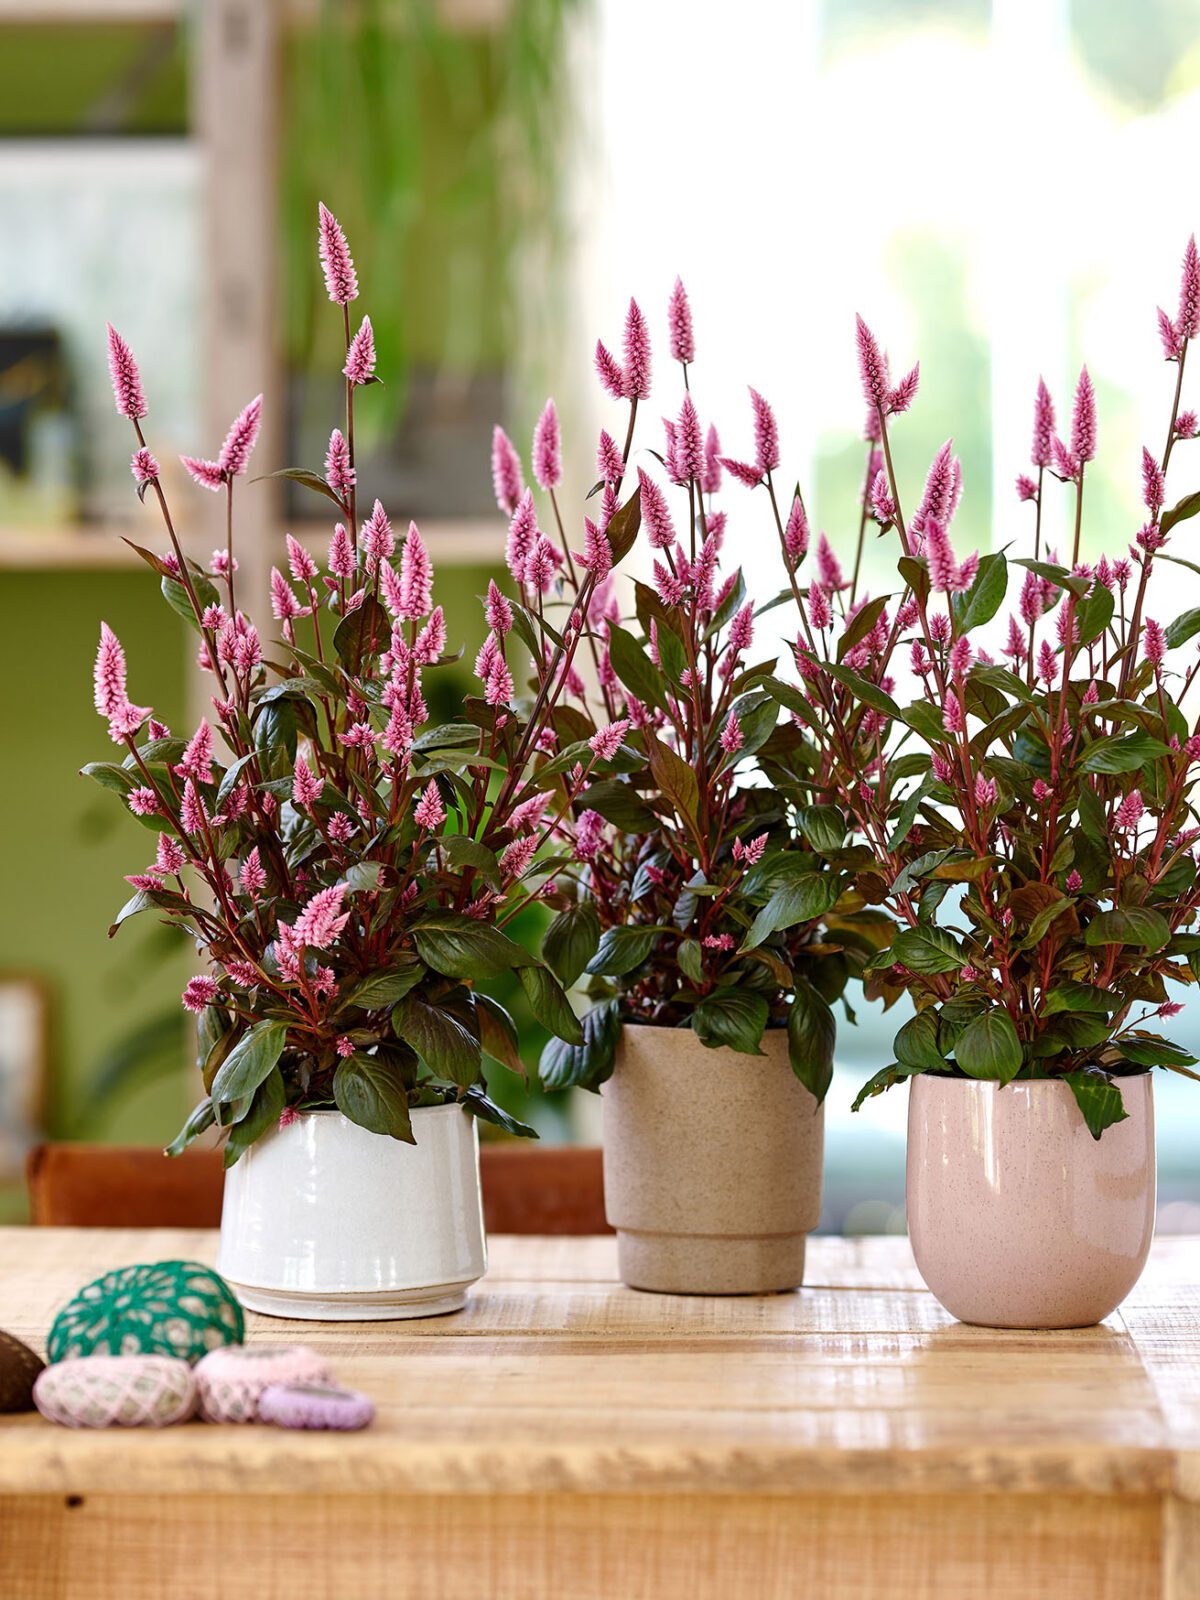 Celosia Wild: fully natural